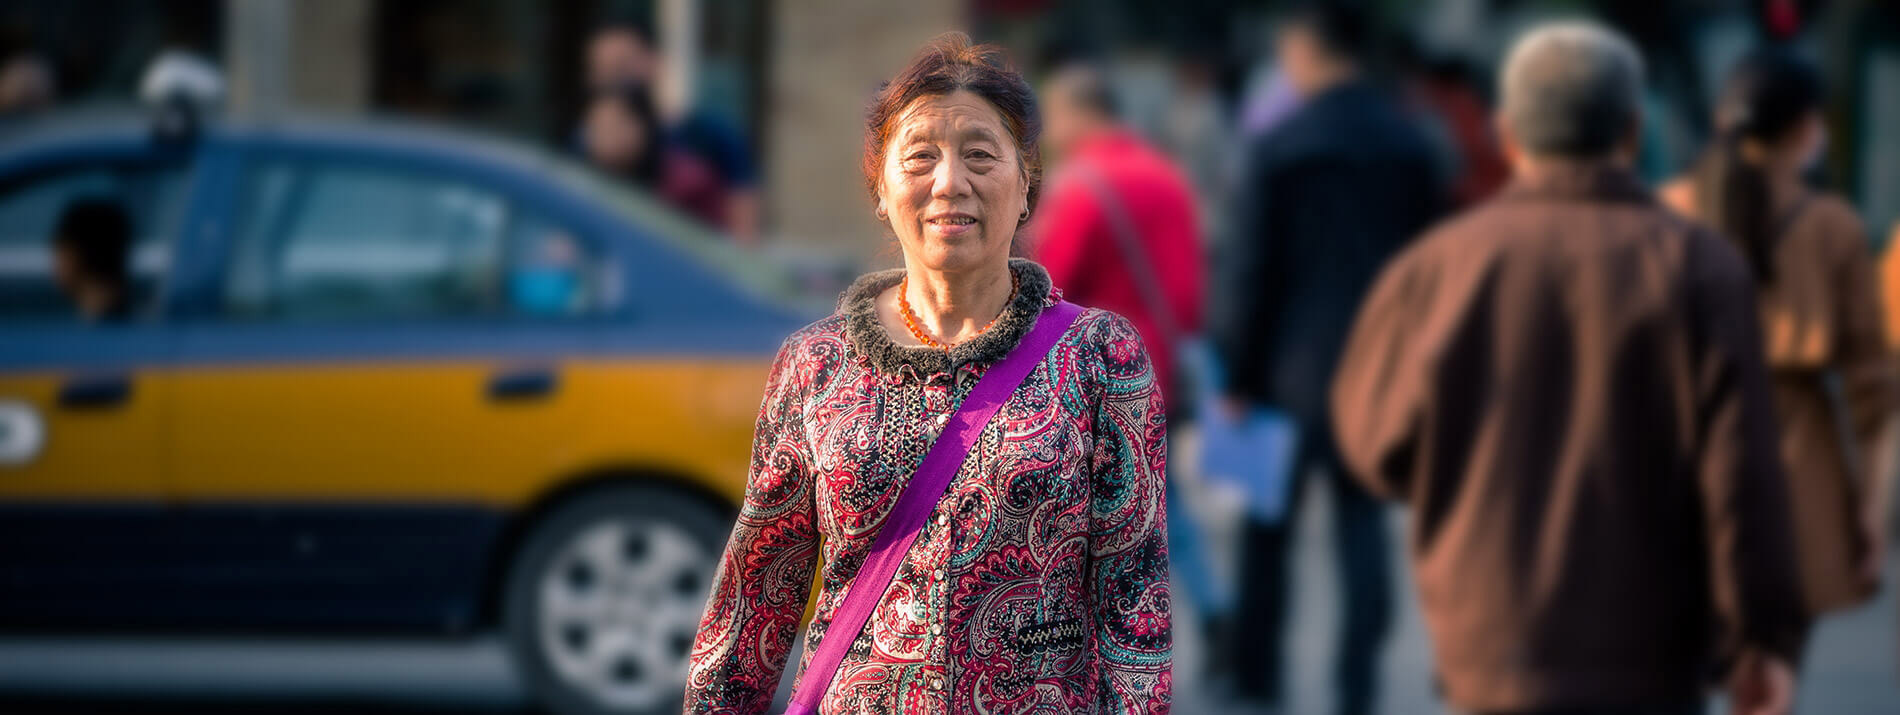 Woman walking in the street with people and a car passing by behind her.